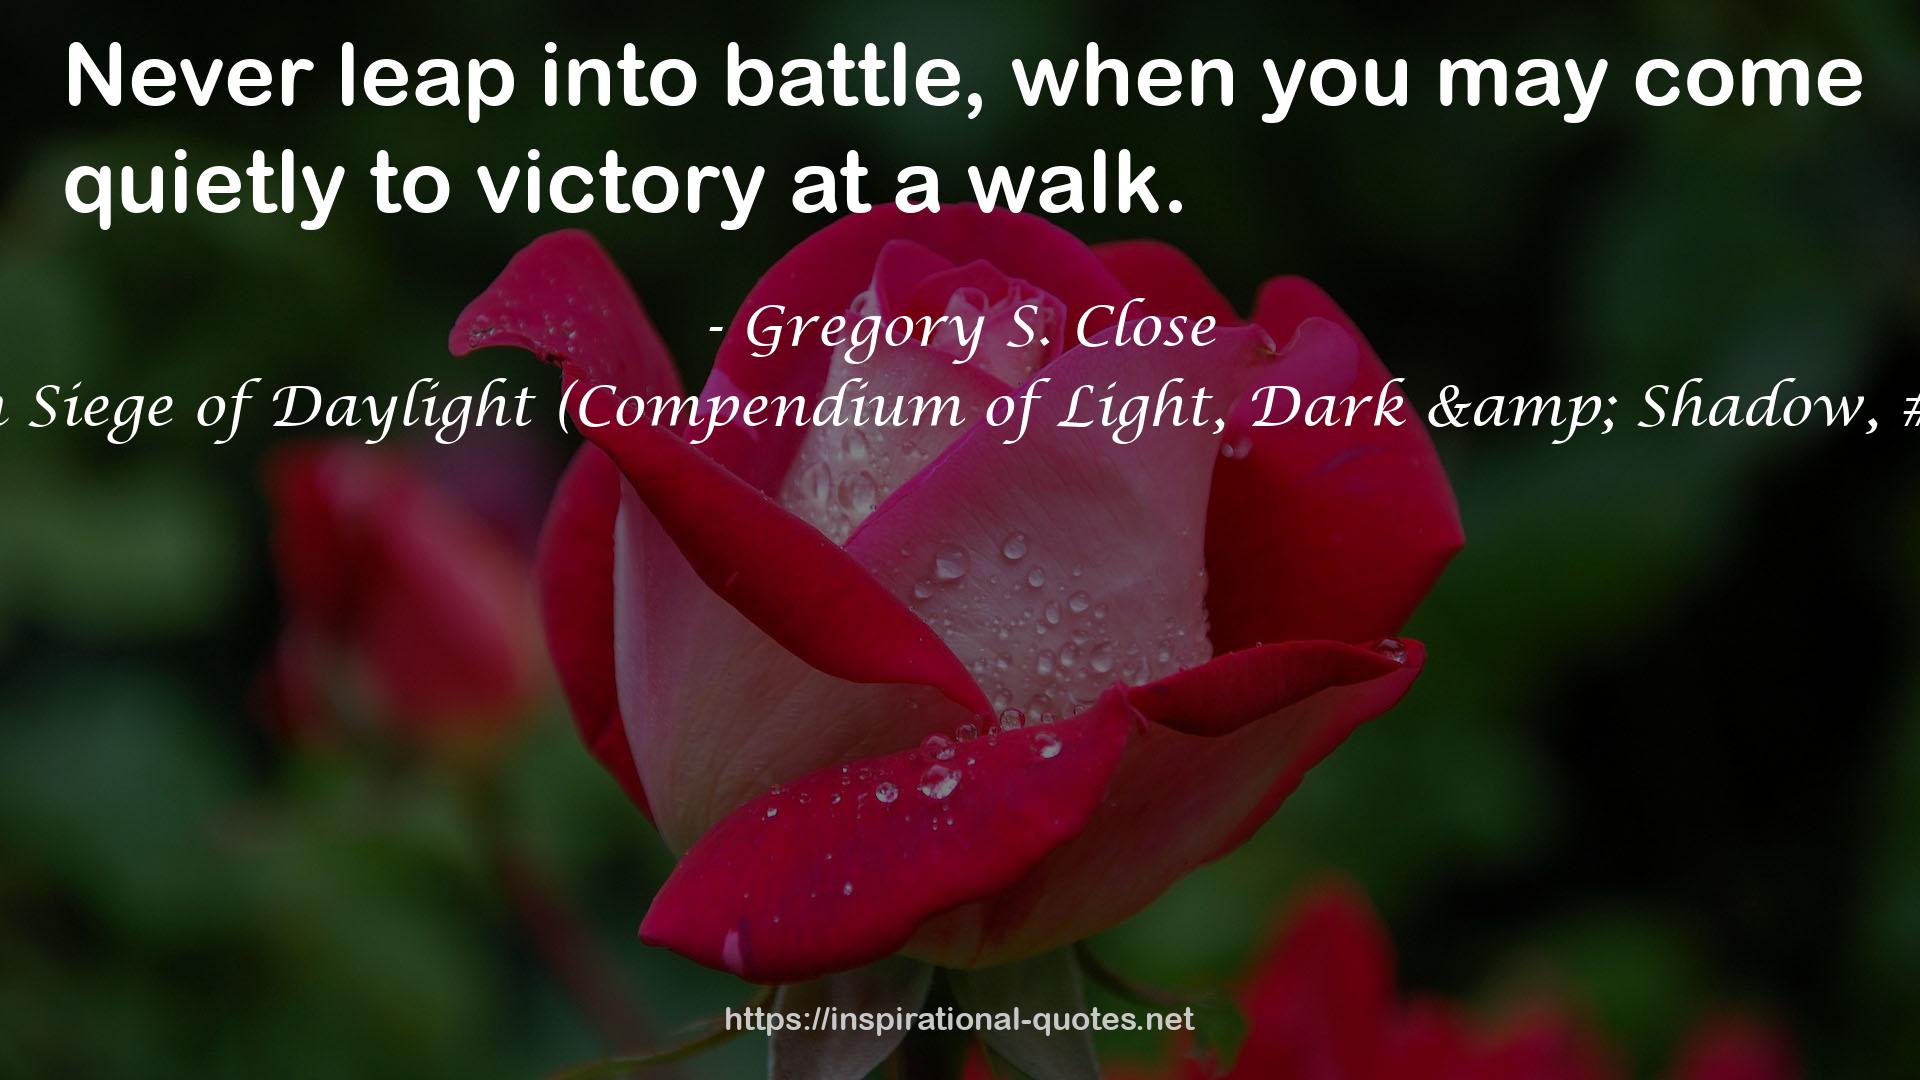 In Siege of Daylight (Compendium of Light, Dark & Shadow, #1) QUOTES